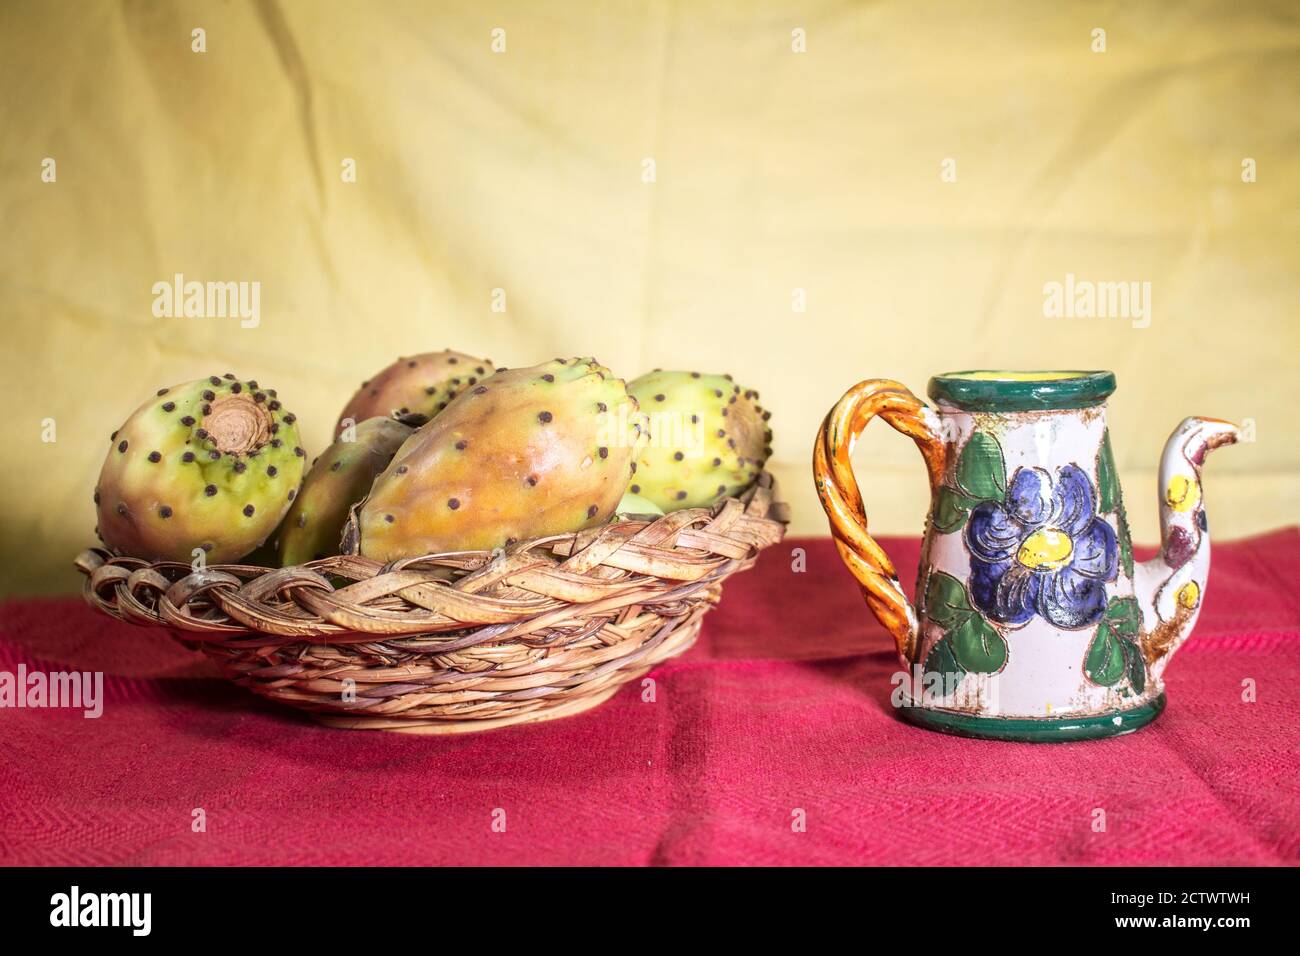 Still life on red surface with wicker basket full of prickly pears and a small decorated ceramic jug Stock Photo